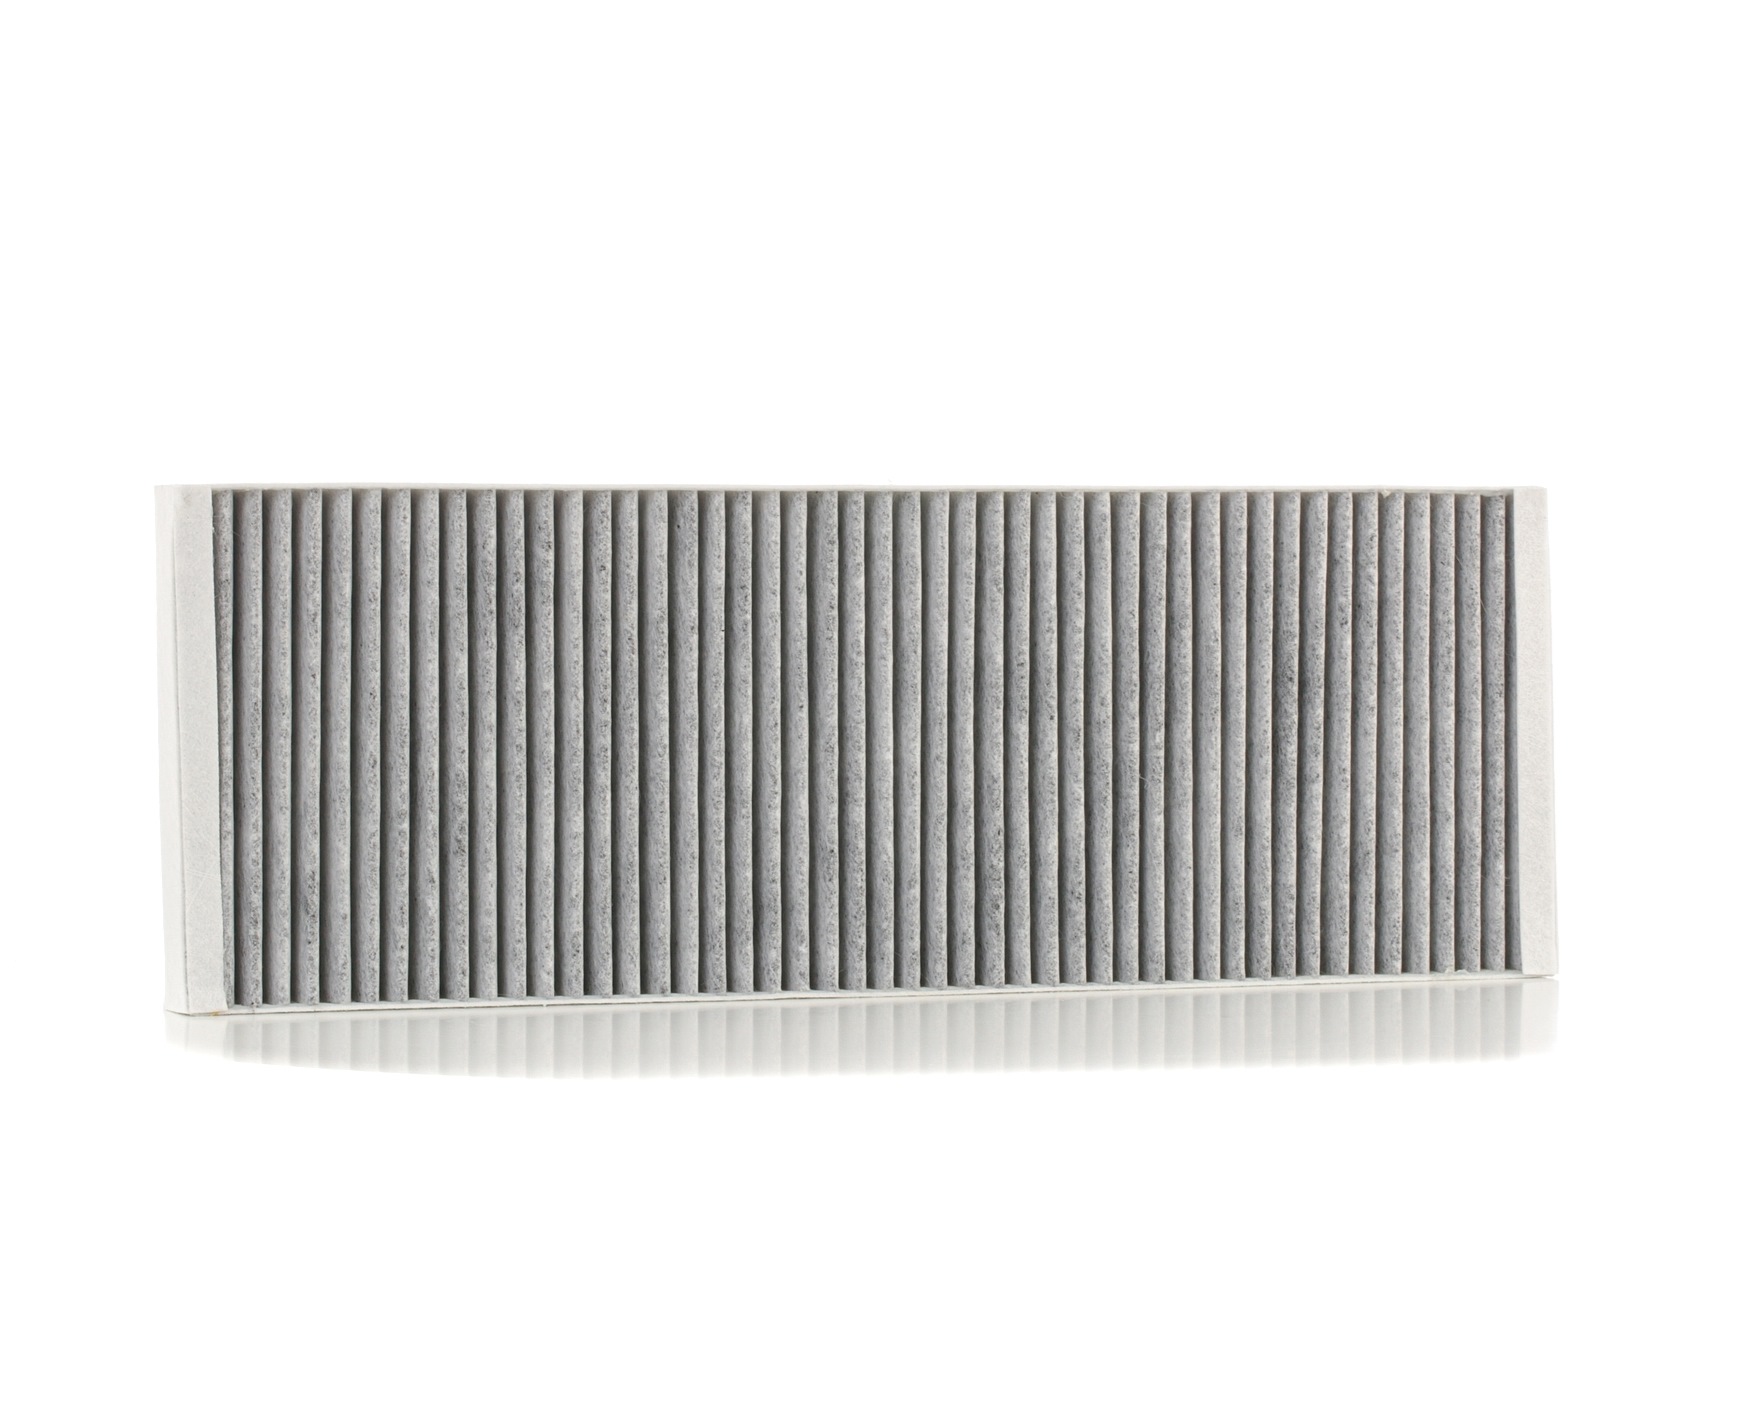 RIDEX Activated Carbon Filter, 410 mm x 145 mm x 25 mm, Activated Carbon Width: 145mm, Height: 25mm, Length: 410mm Cabin filter 424I0200 buy